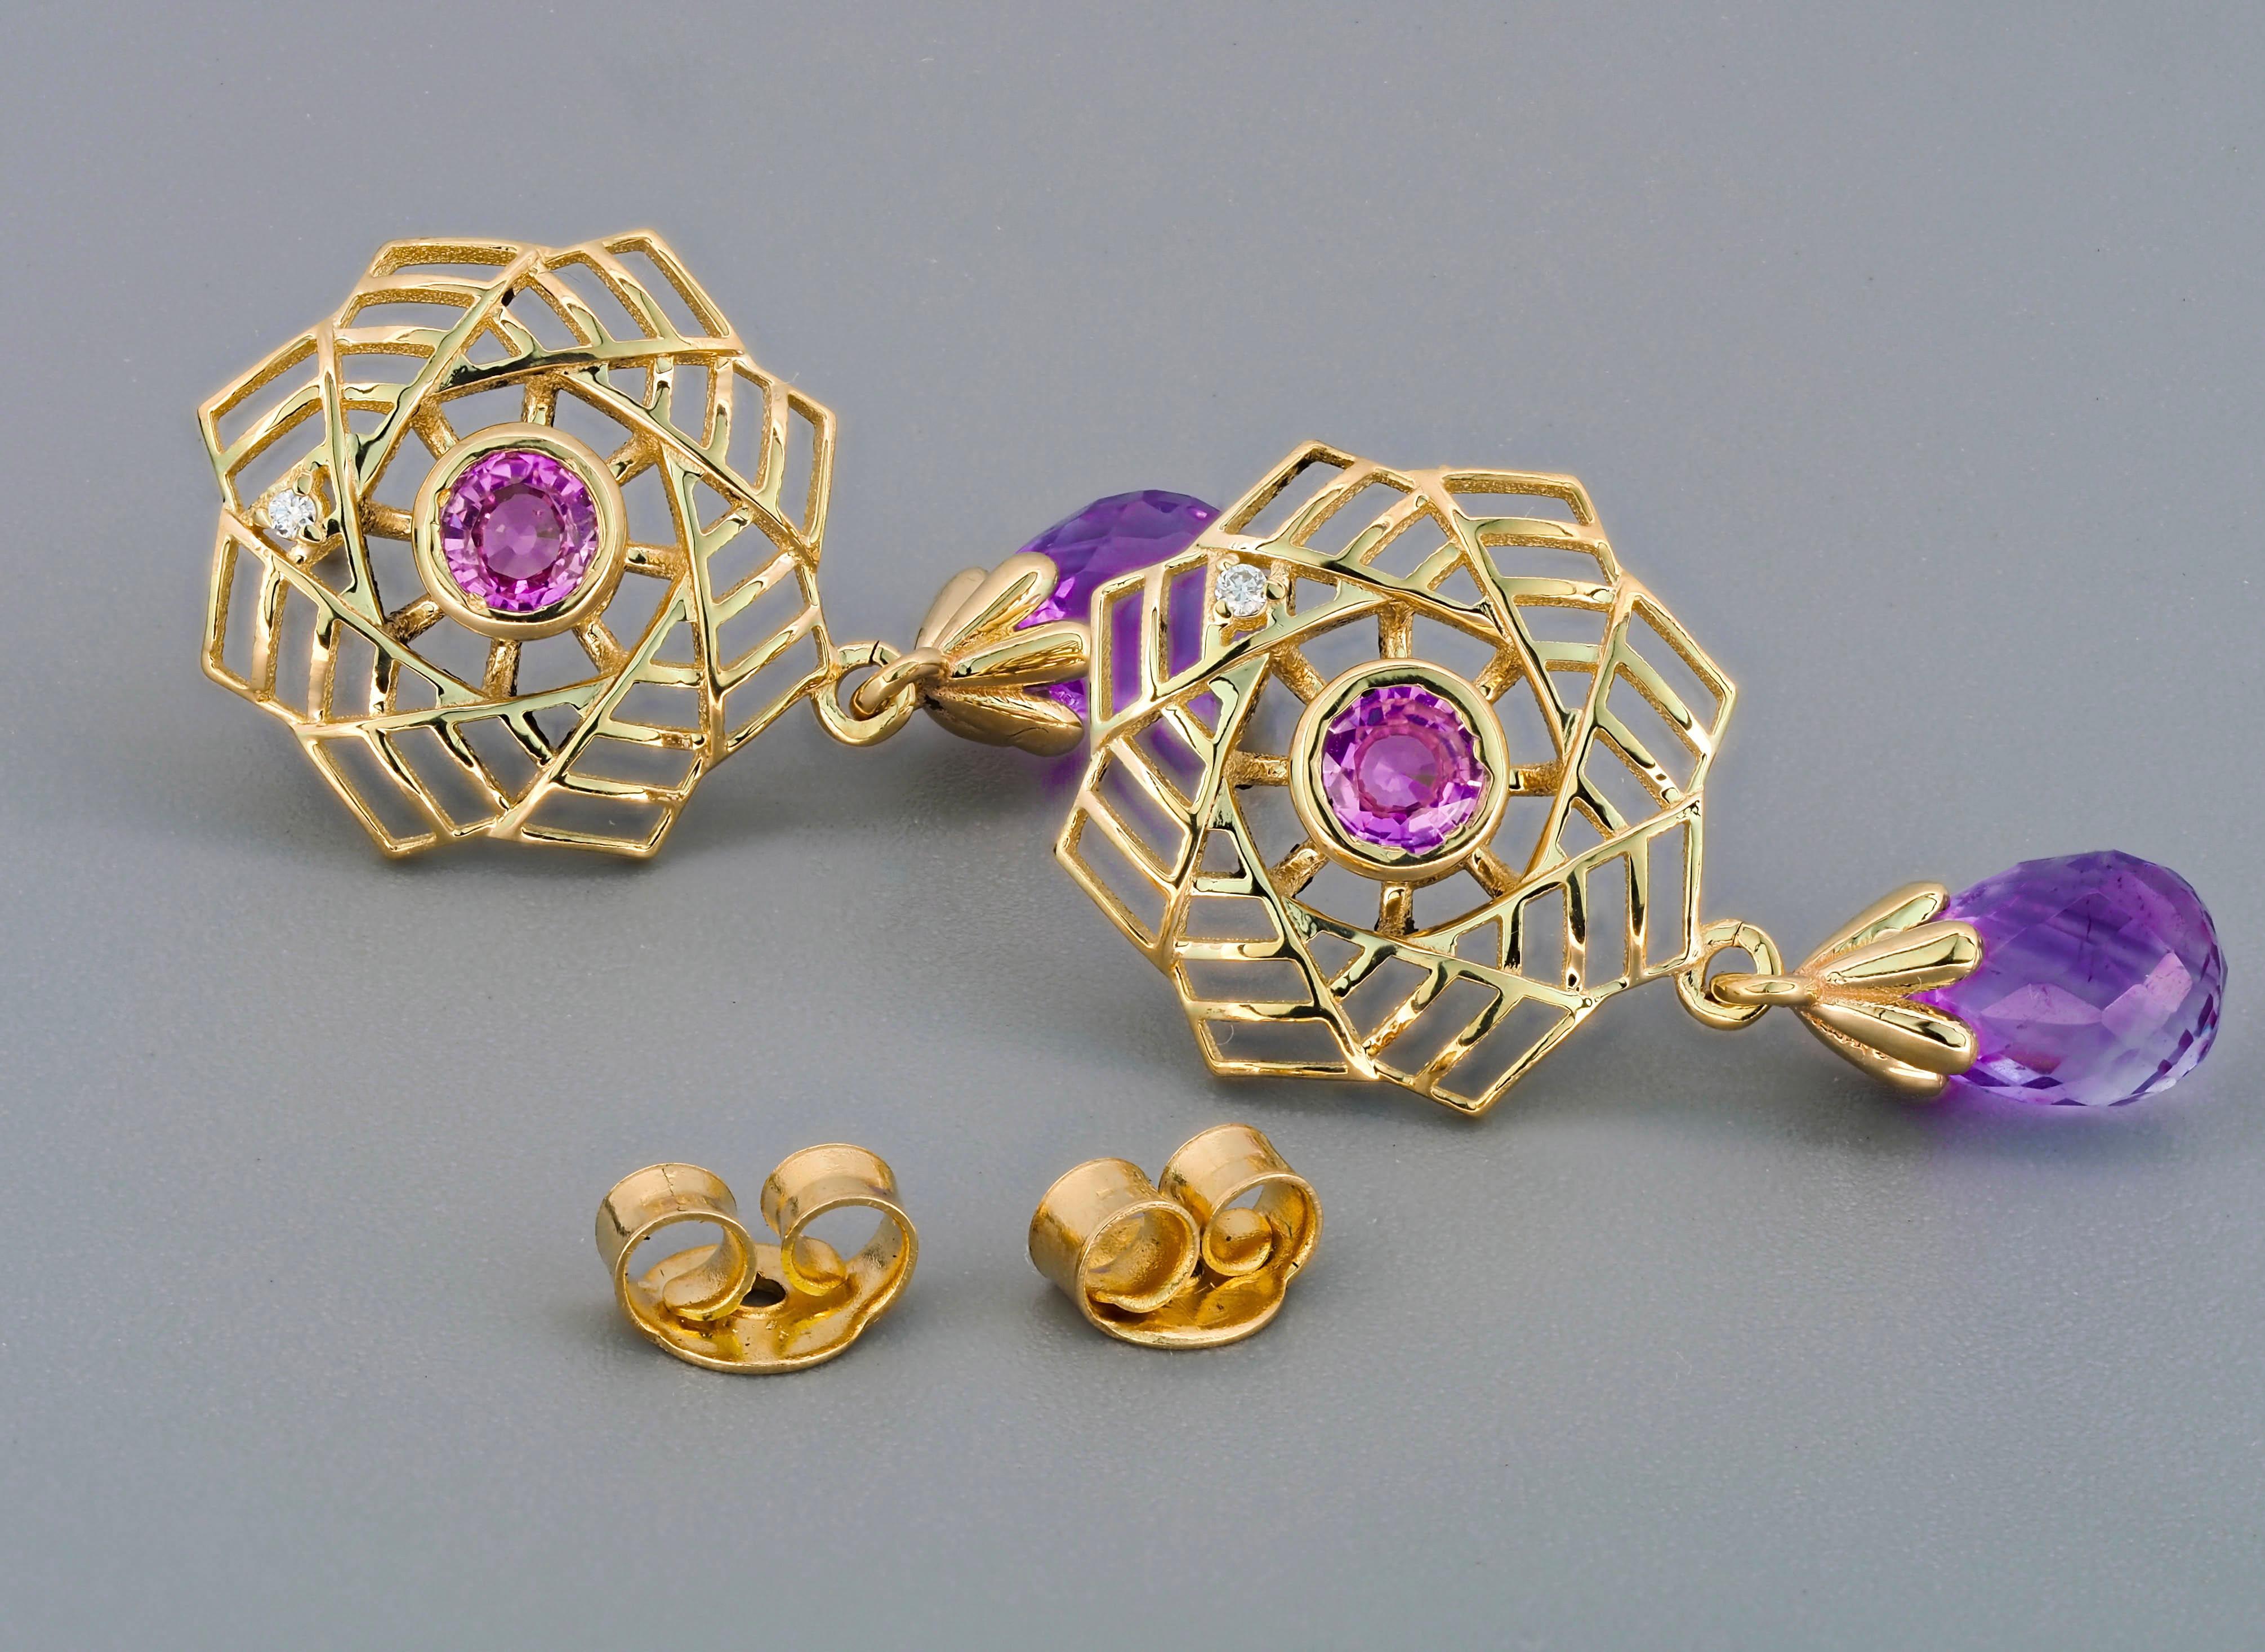 Amethyst 14k gold earrings studs. 
Pink sapphire studs. Briolette drop earrings. Natural gemstone earrings. February bithstone earrings.

Material: 14k gold
Weight: 2.80 g.
Earrings size: 25 x 14 mm.

Amethyst:
2 pieces, lavender - violet - color,